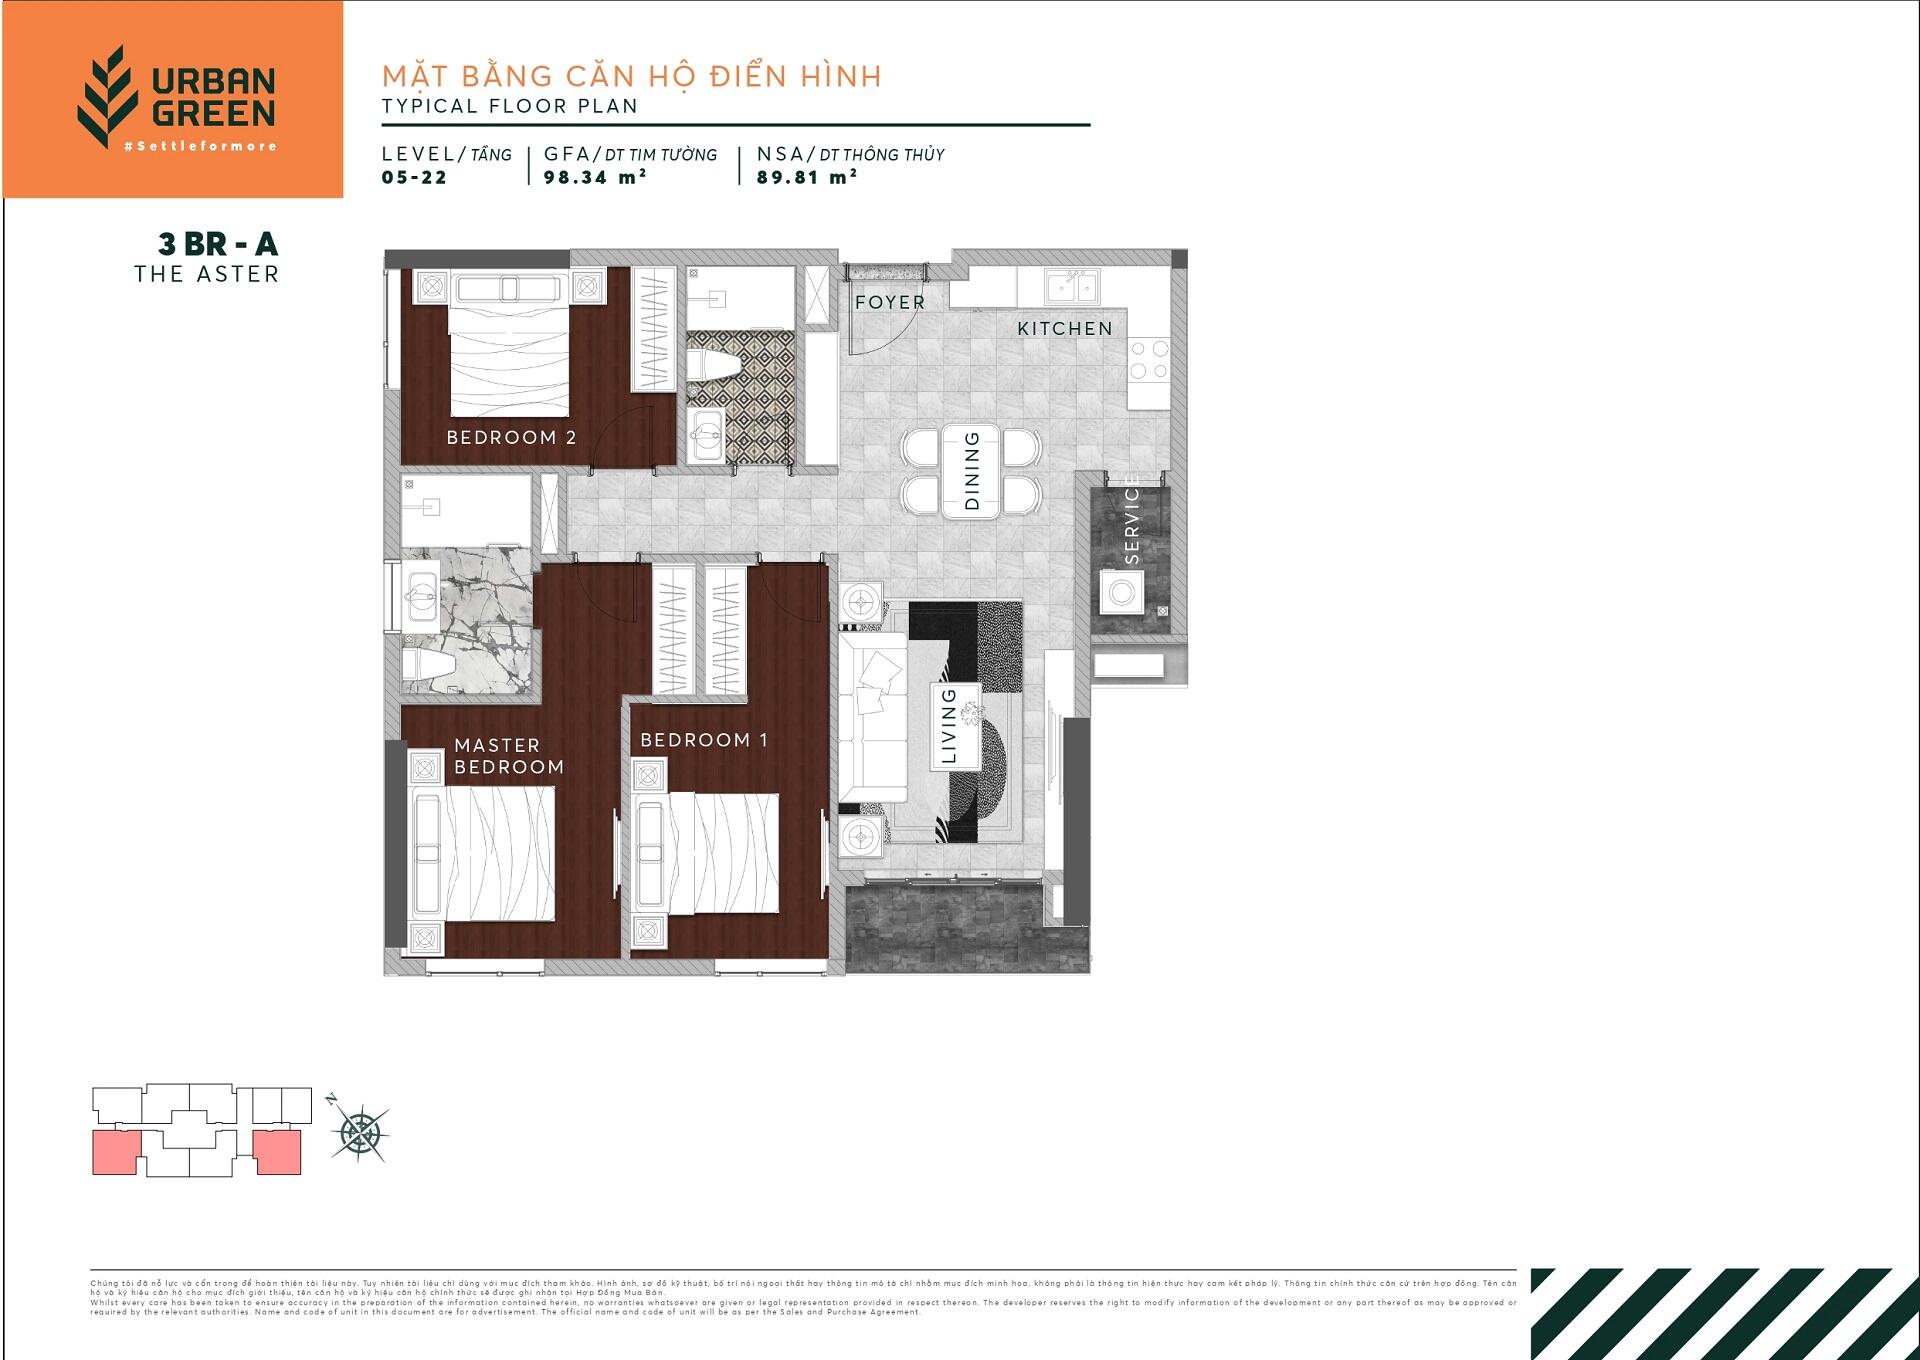 The Aster apartment layout 3 bedrooms 3BR - A